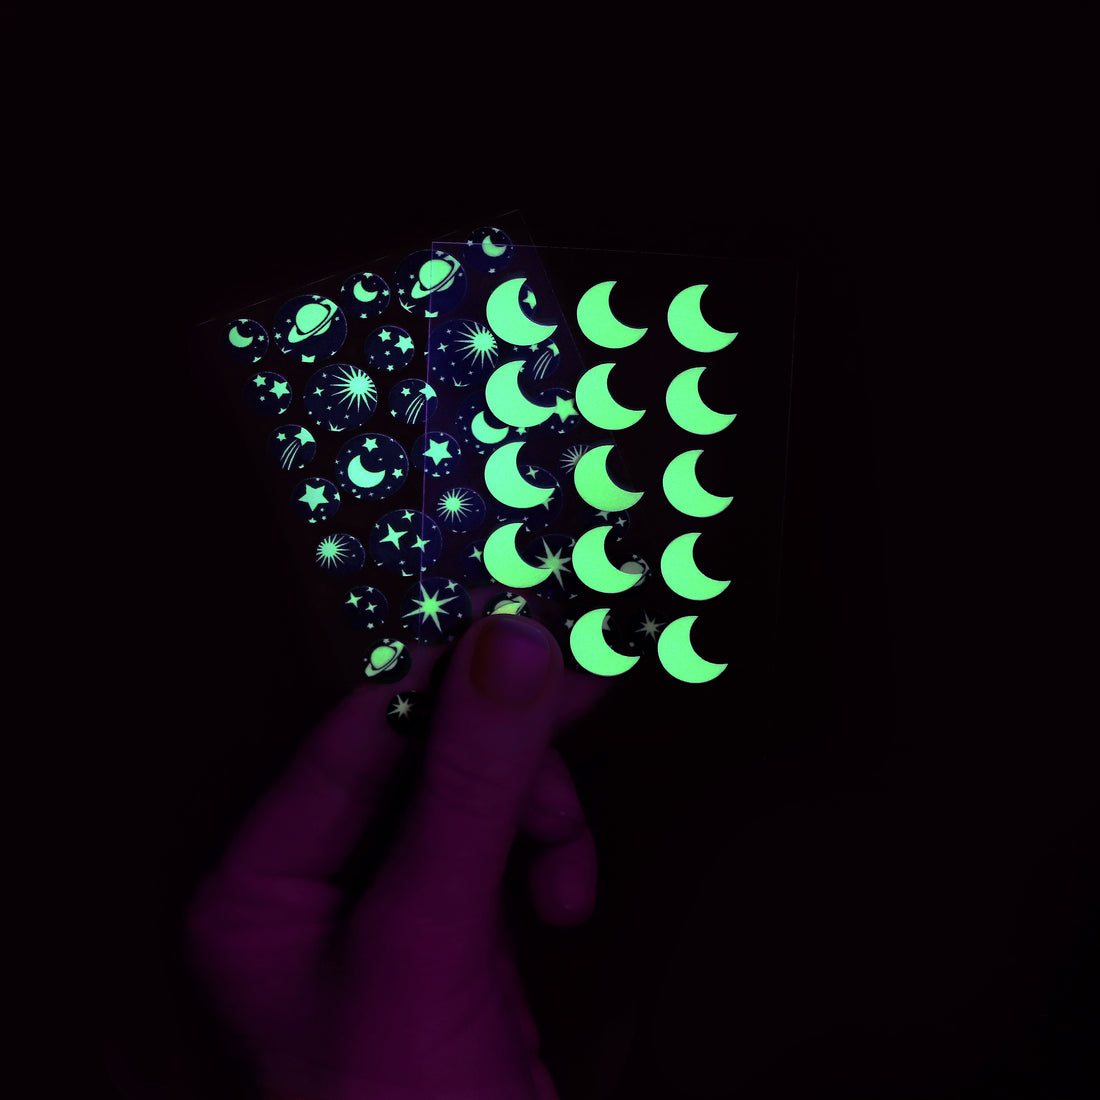 Glow in the Dark Pimple Patche-828